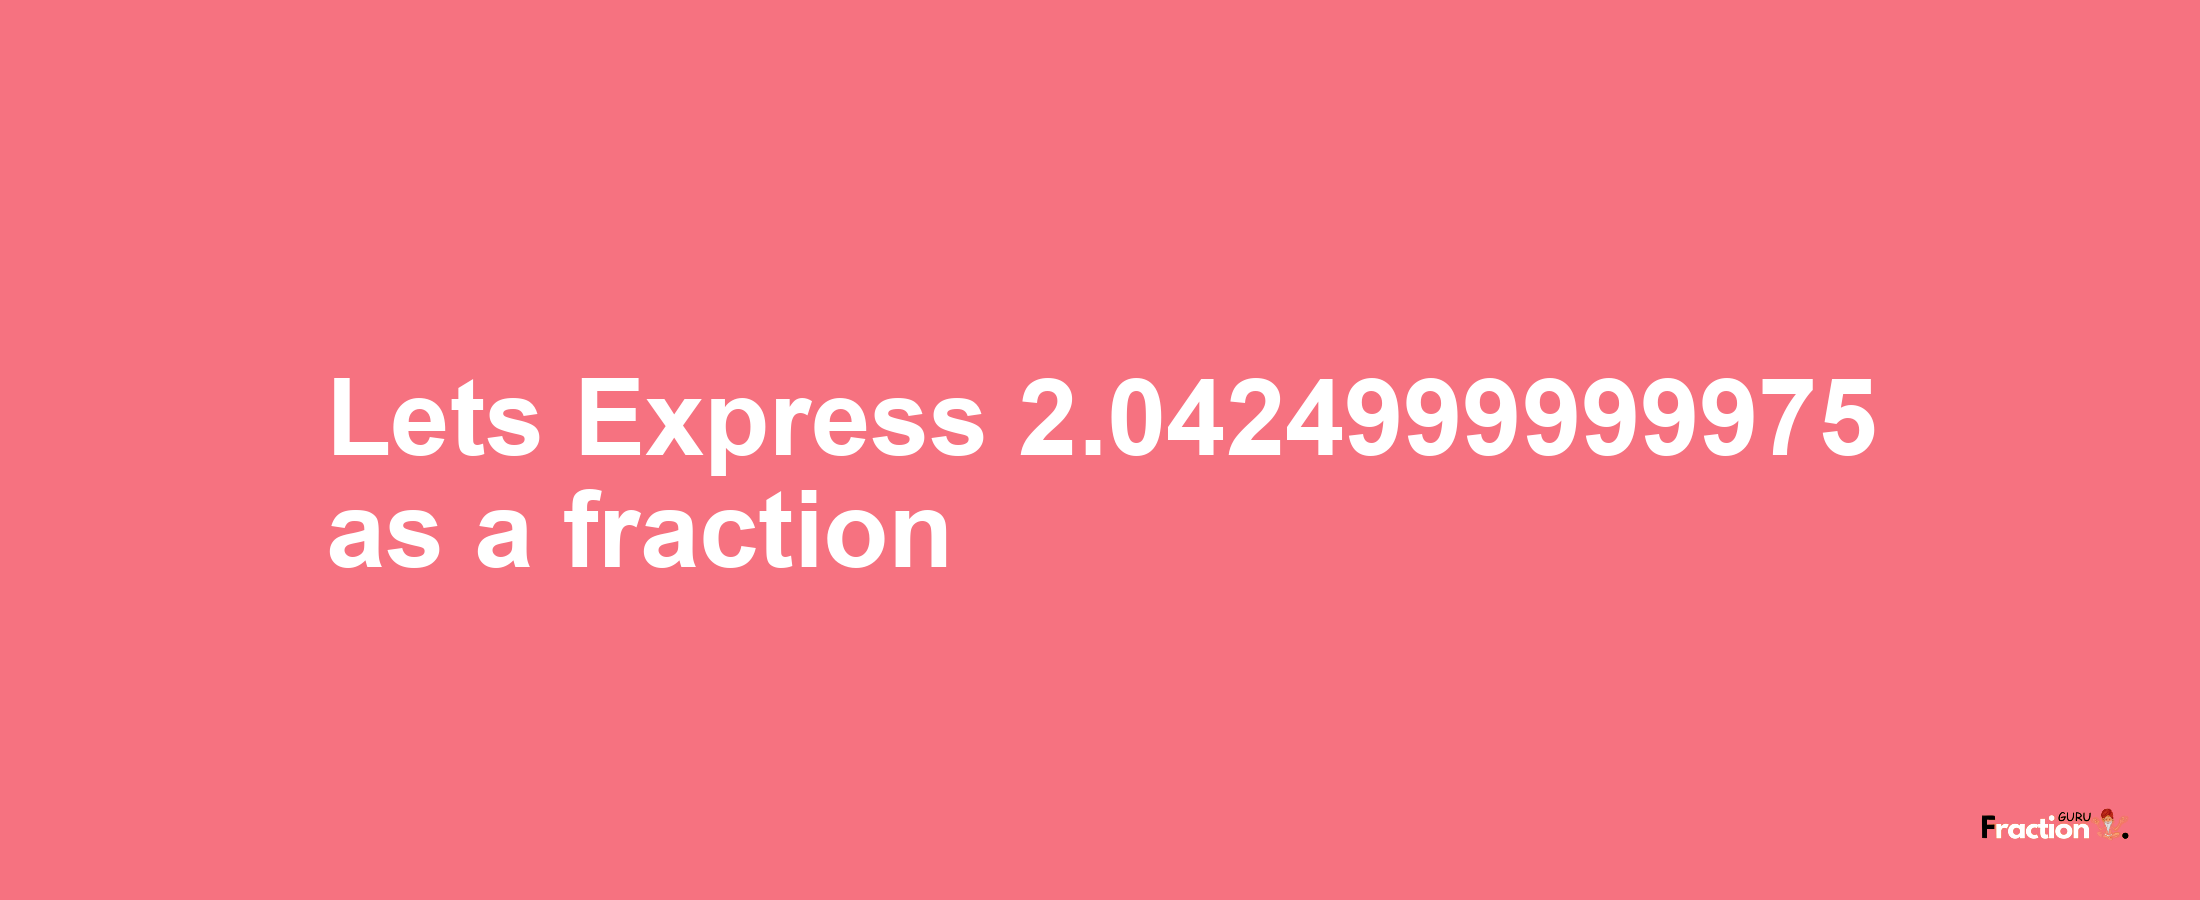 Lets Express 2.0424999999975 as afraction